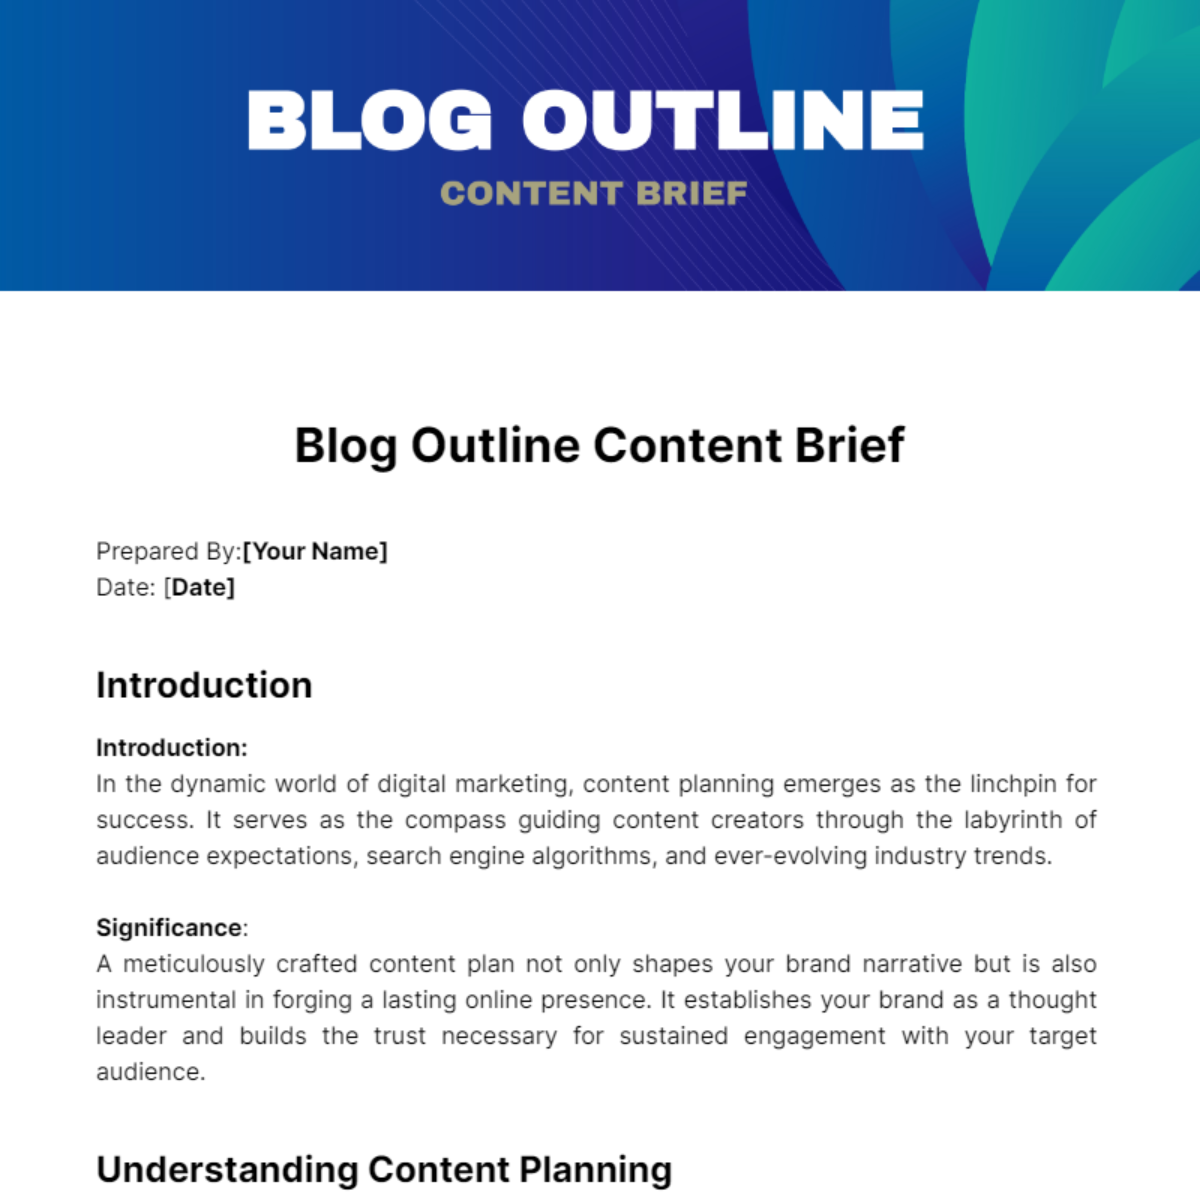 Free Blog Outline Content Brief Template